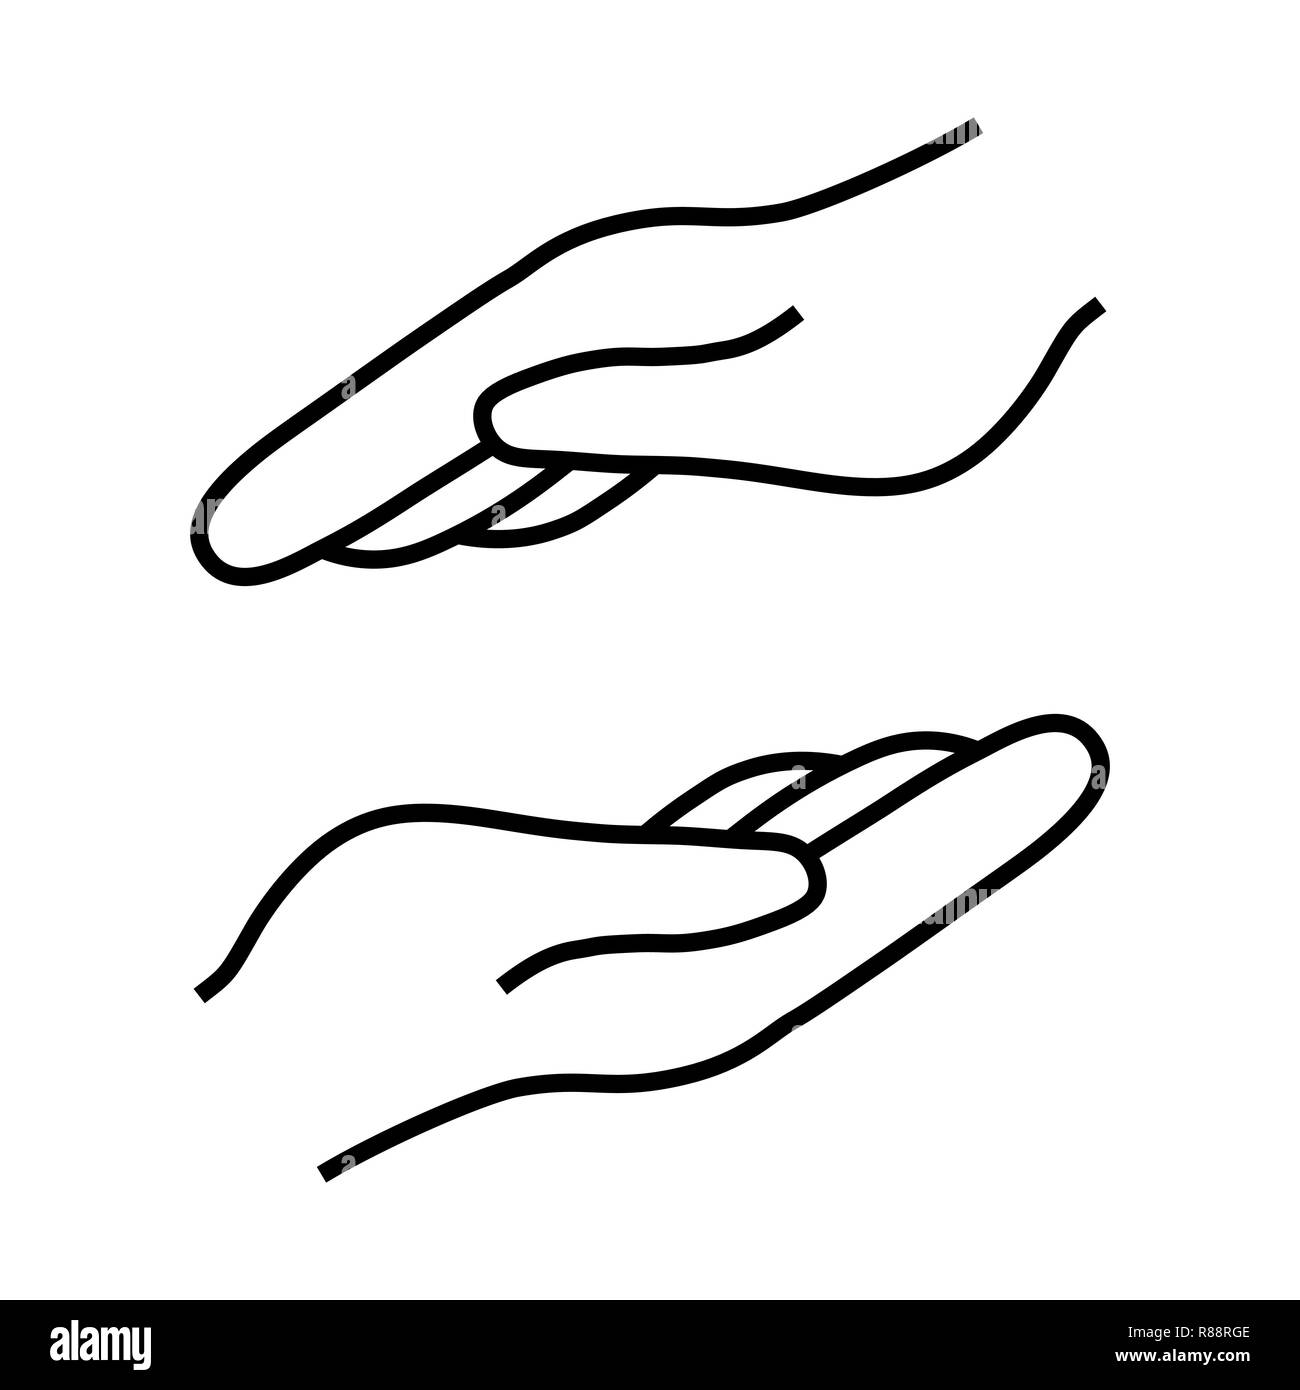 Help and protect Hand vector icon on white background Stock Vector ...